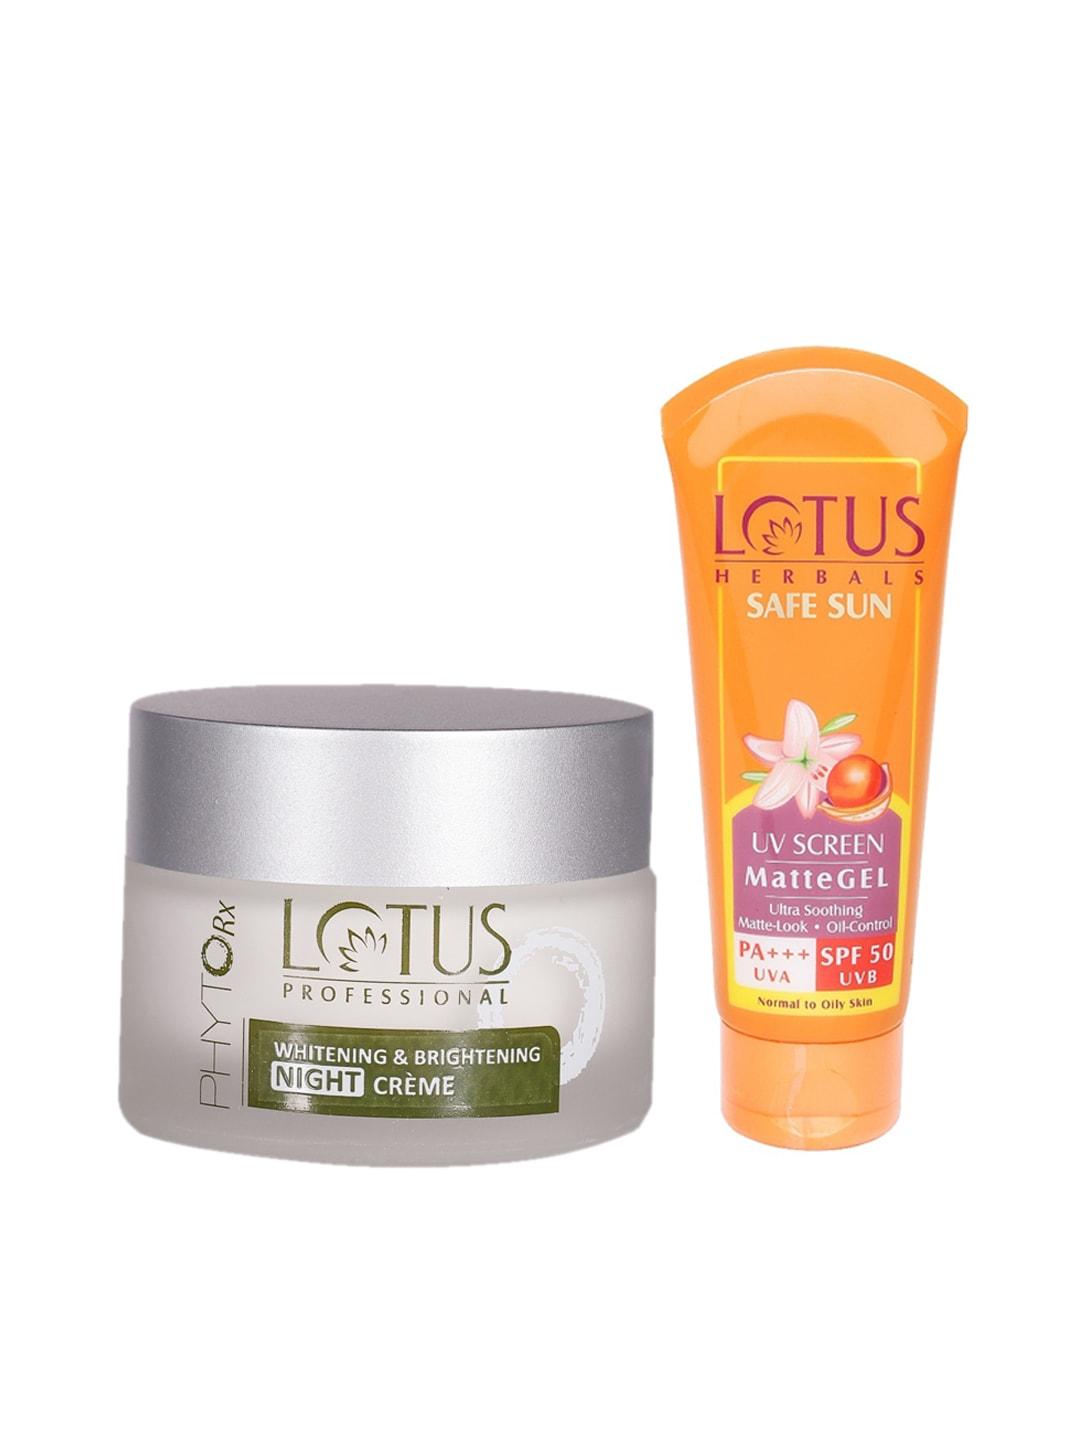 Lotus Herbals Pack of Sustainable Sunscreen & Night Creme